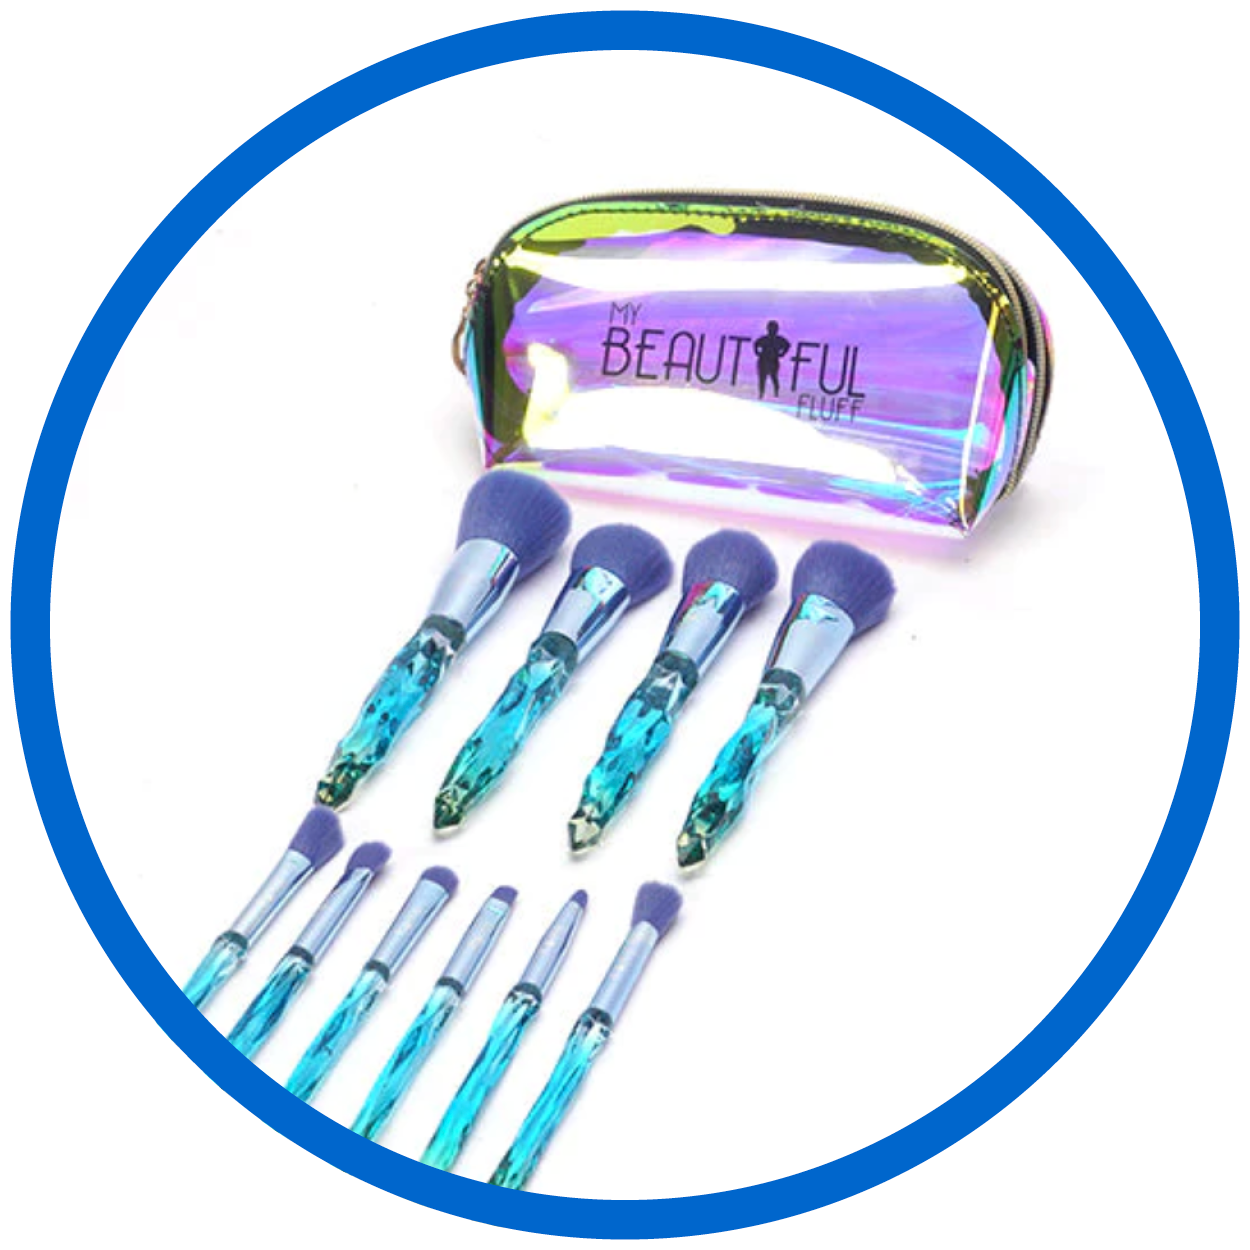 Ten piece makeup brush set in turquoise crystal with purple brush, pictured with makeup bag.